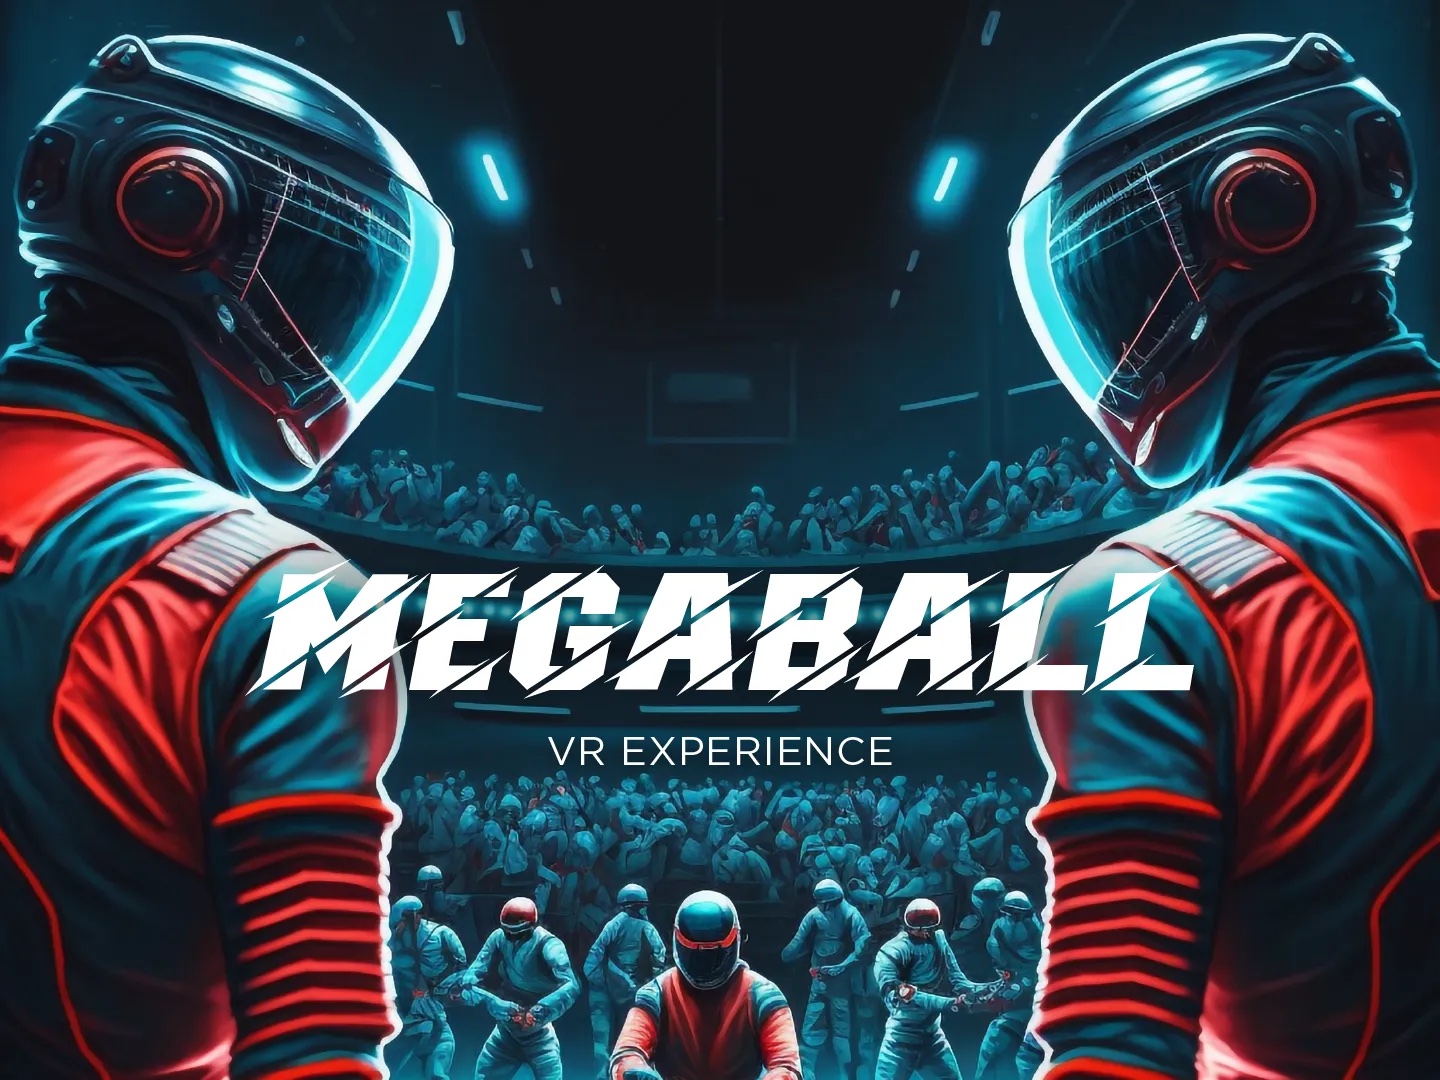 Megaball game showing people in futurisitic spacesuits in an arena.